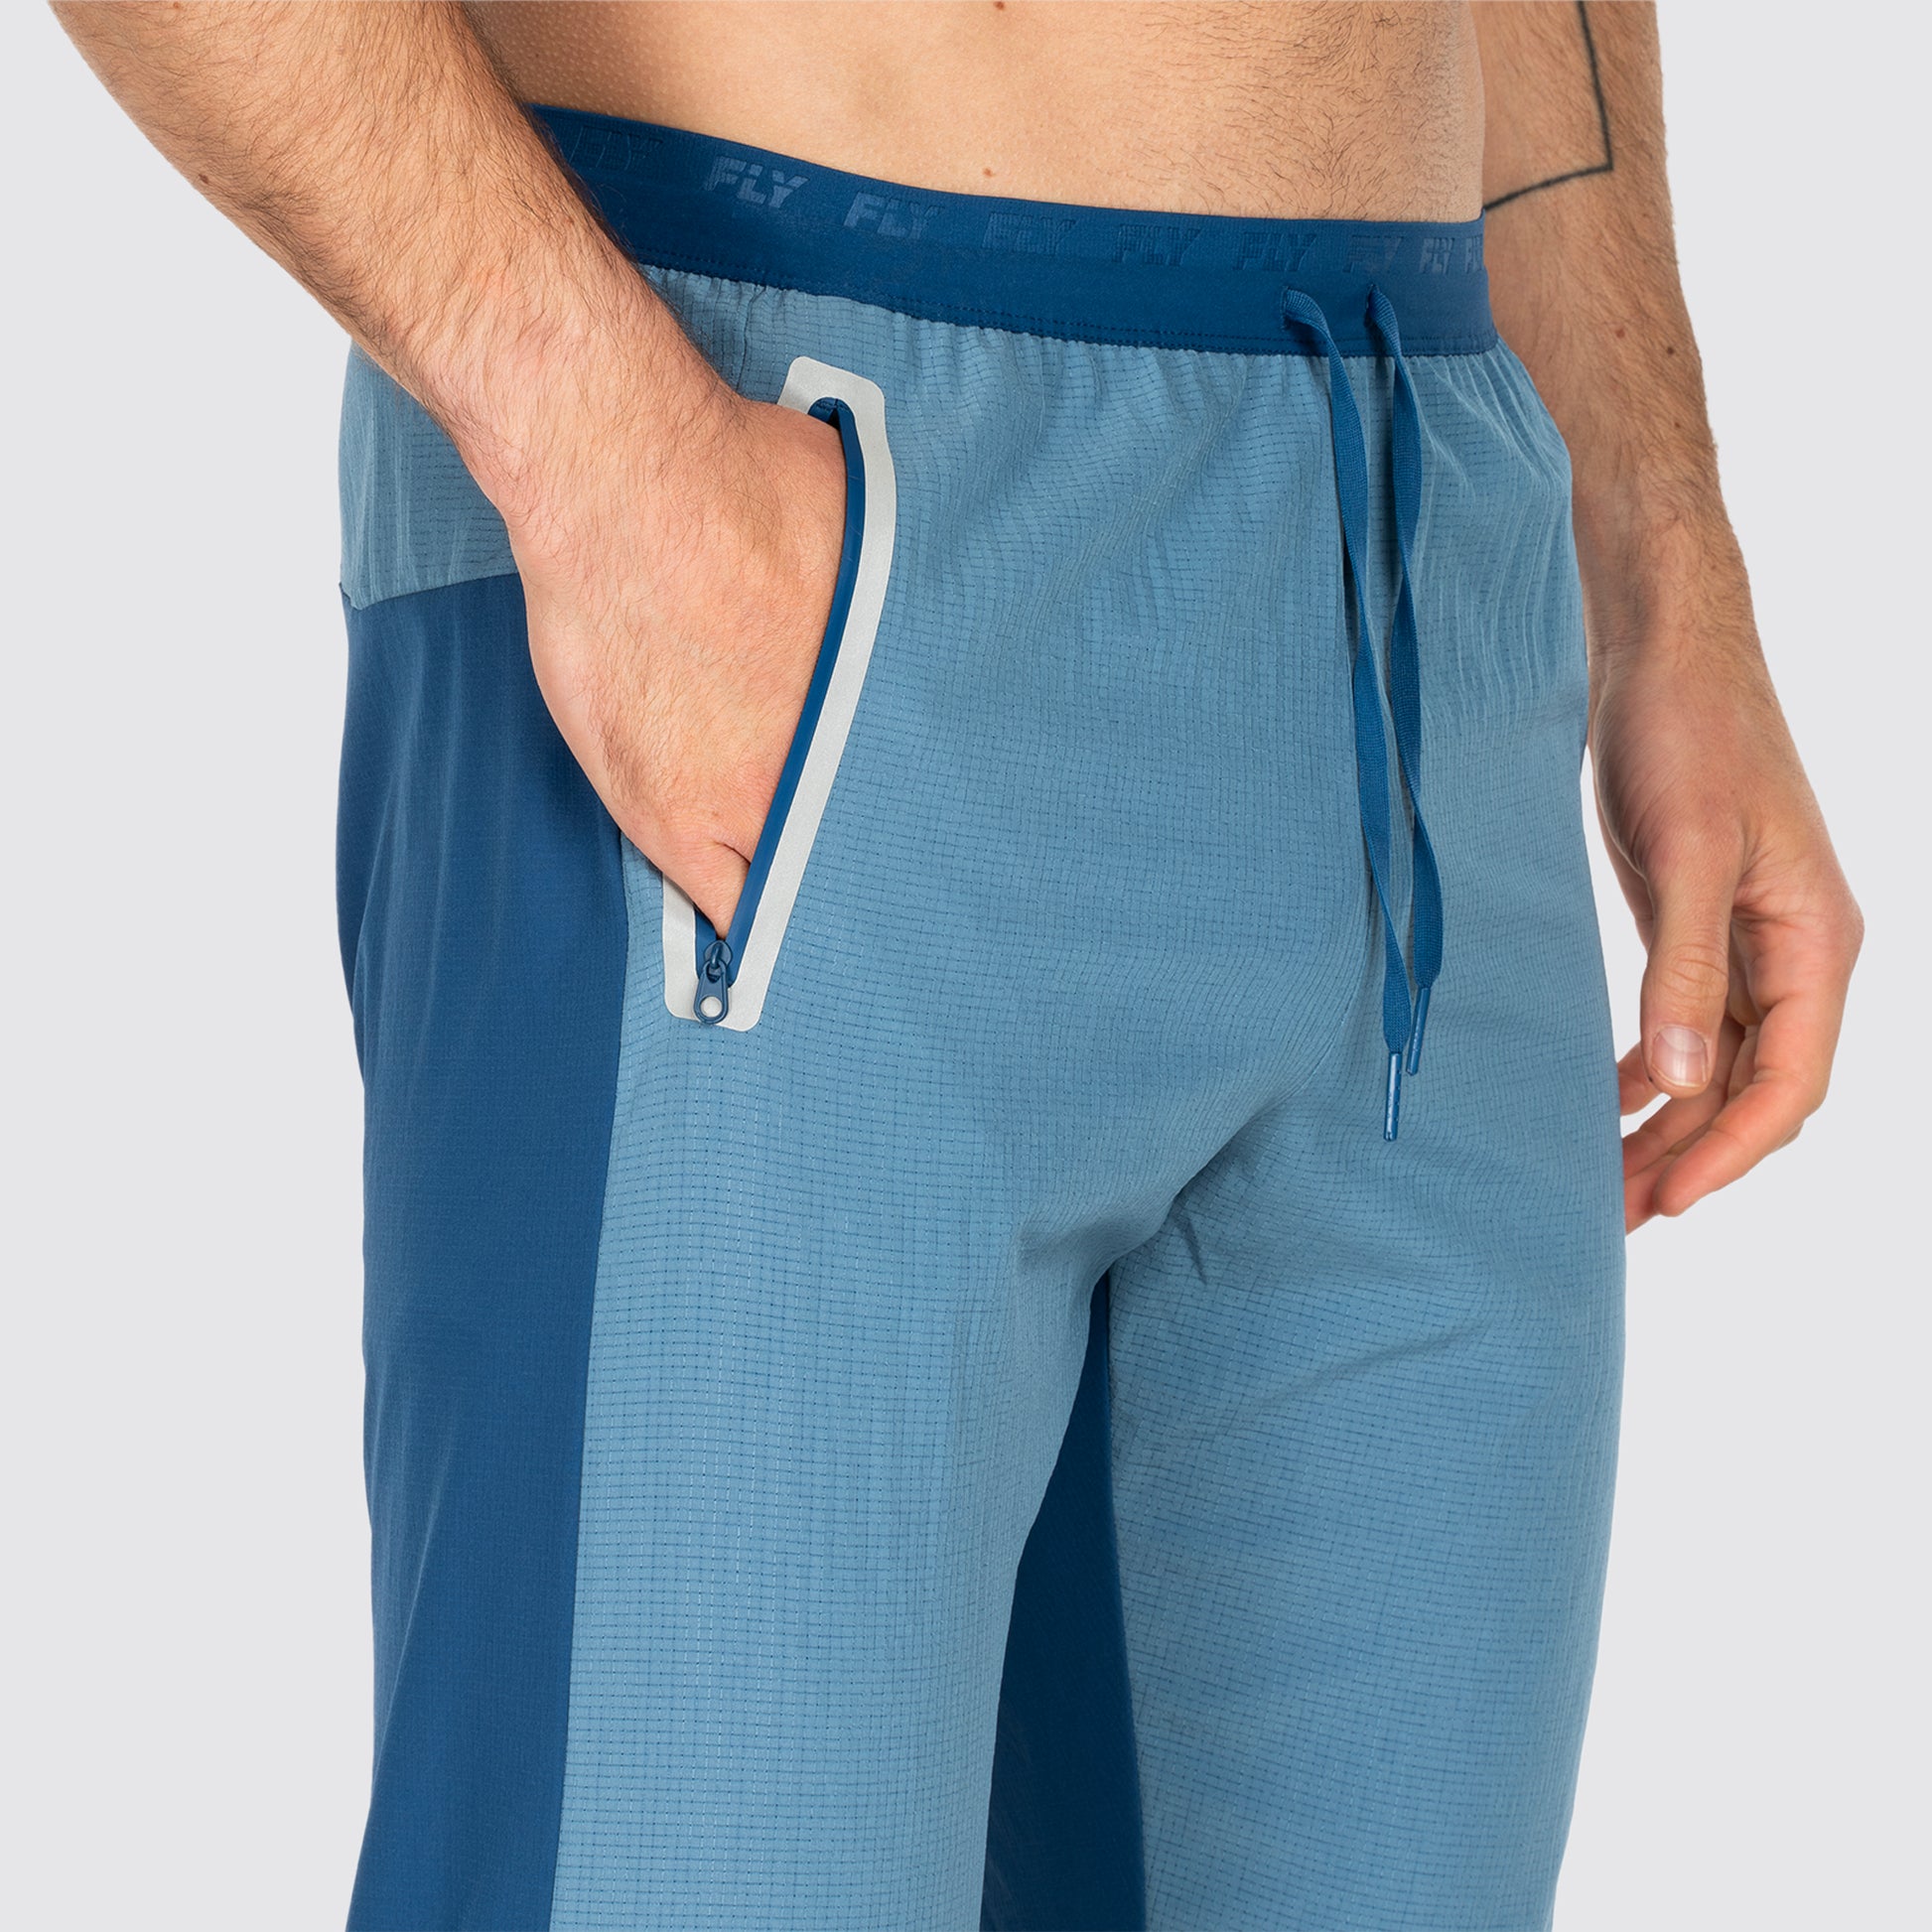 Tempo Running Trousers (8243891634428)